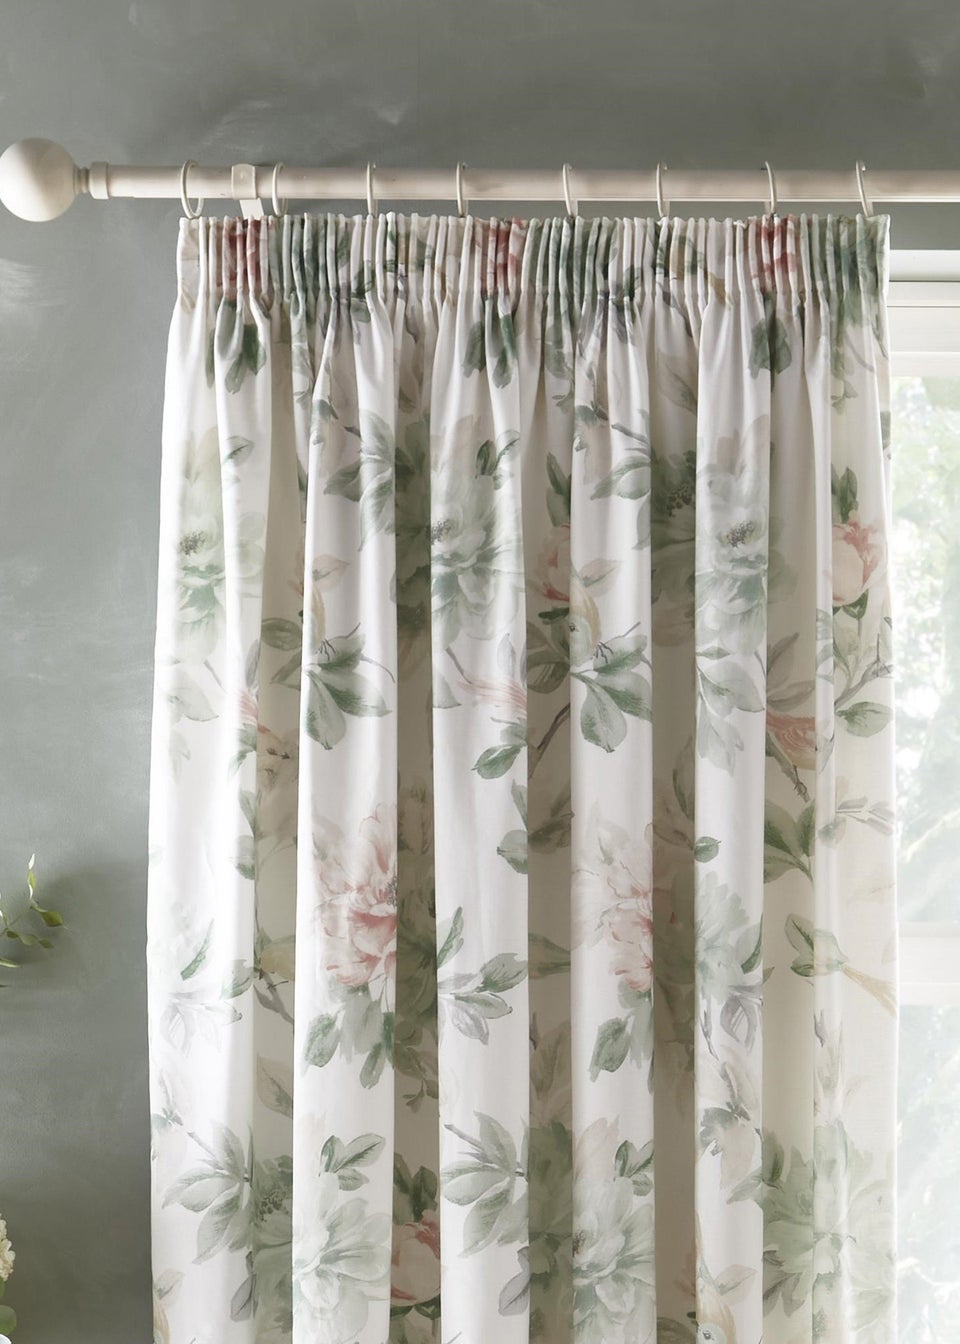 Appletree Heritage Campion Pencil Pleat Curtains With Tie-Backs